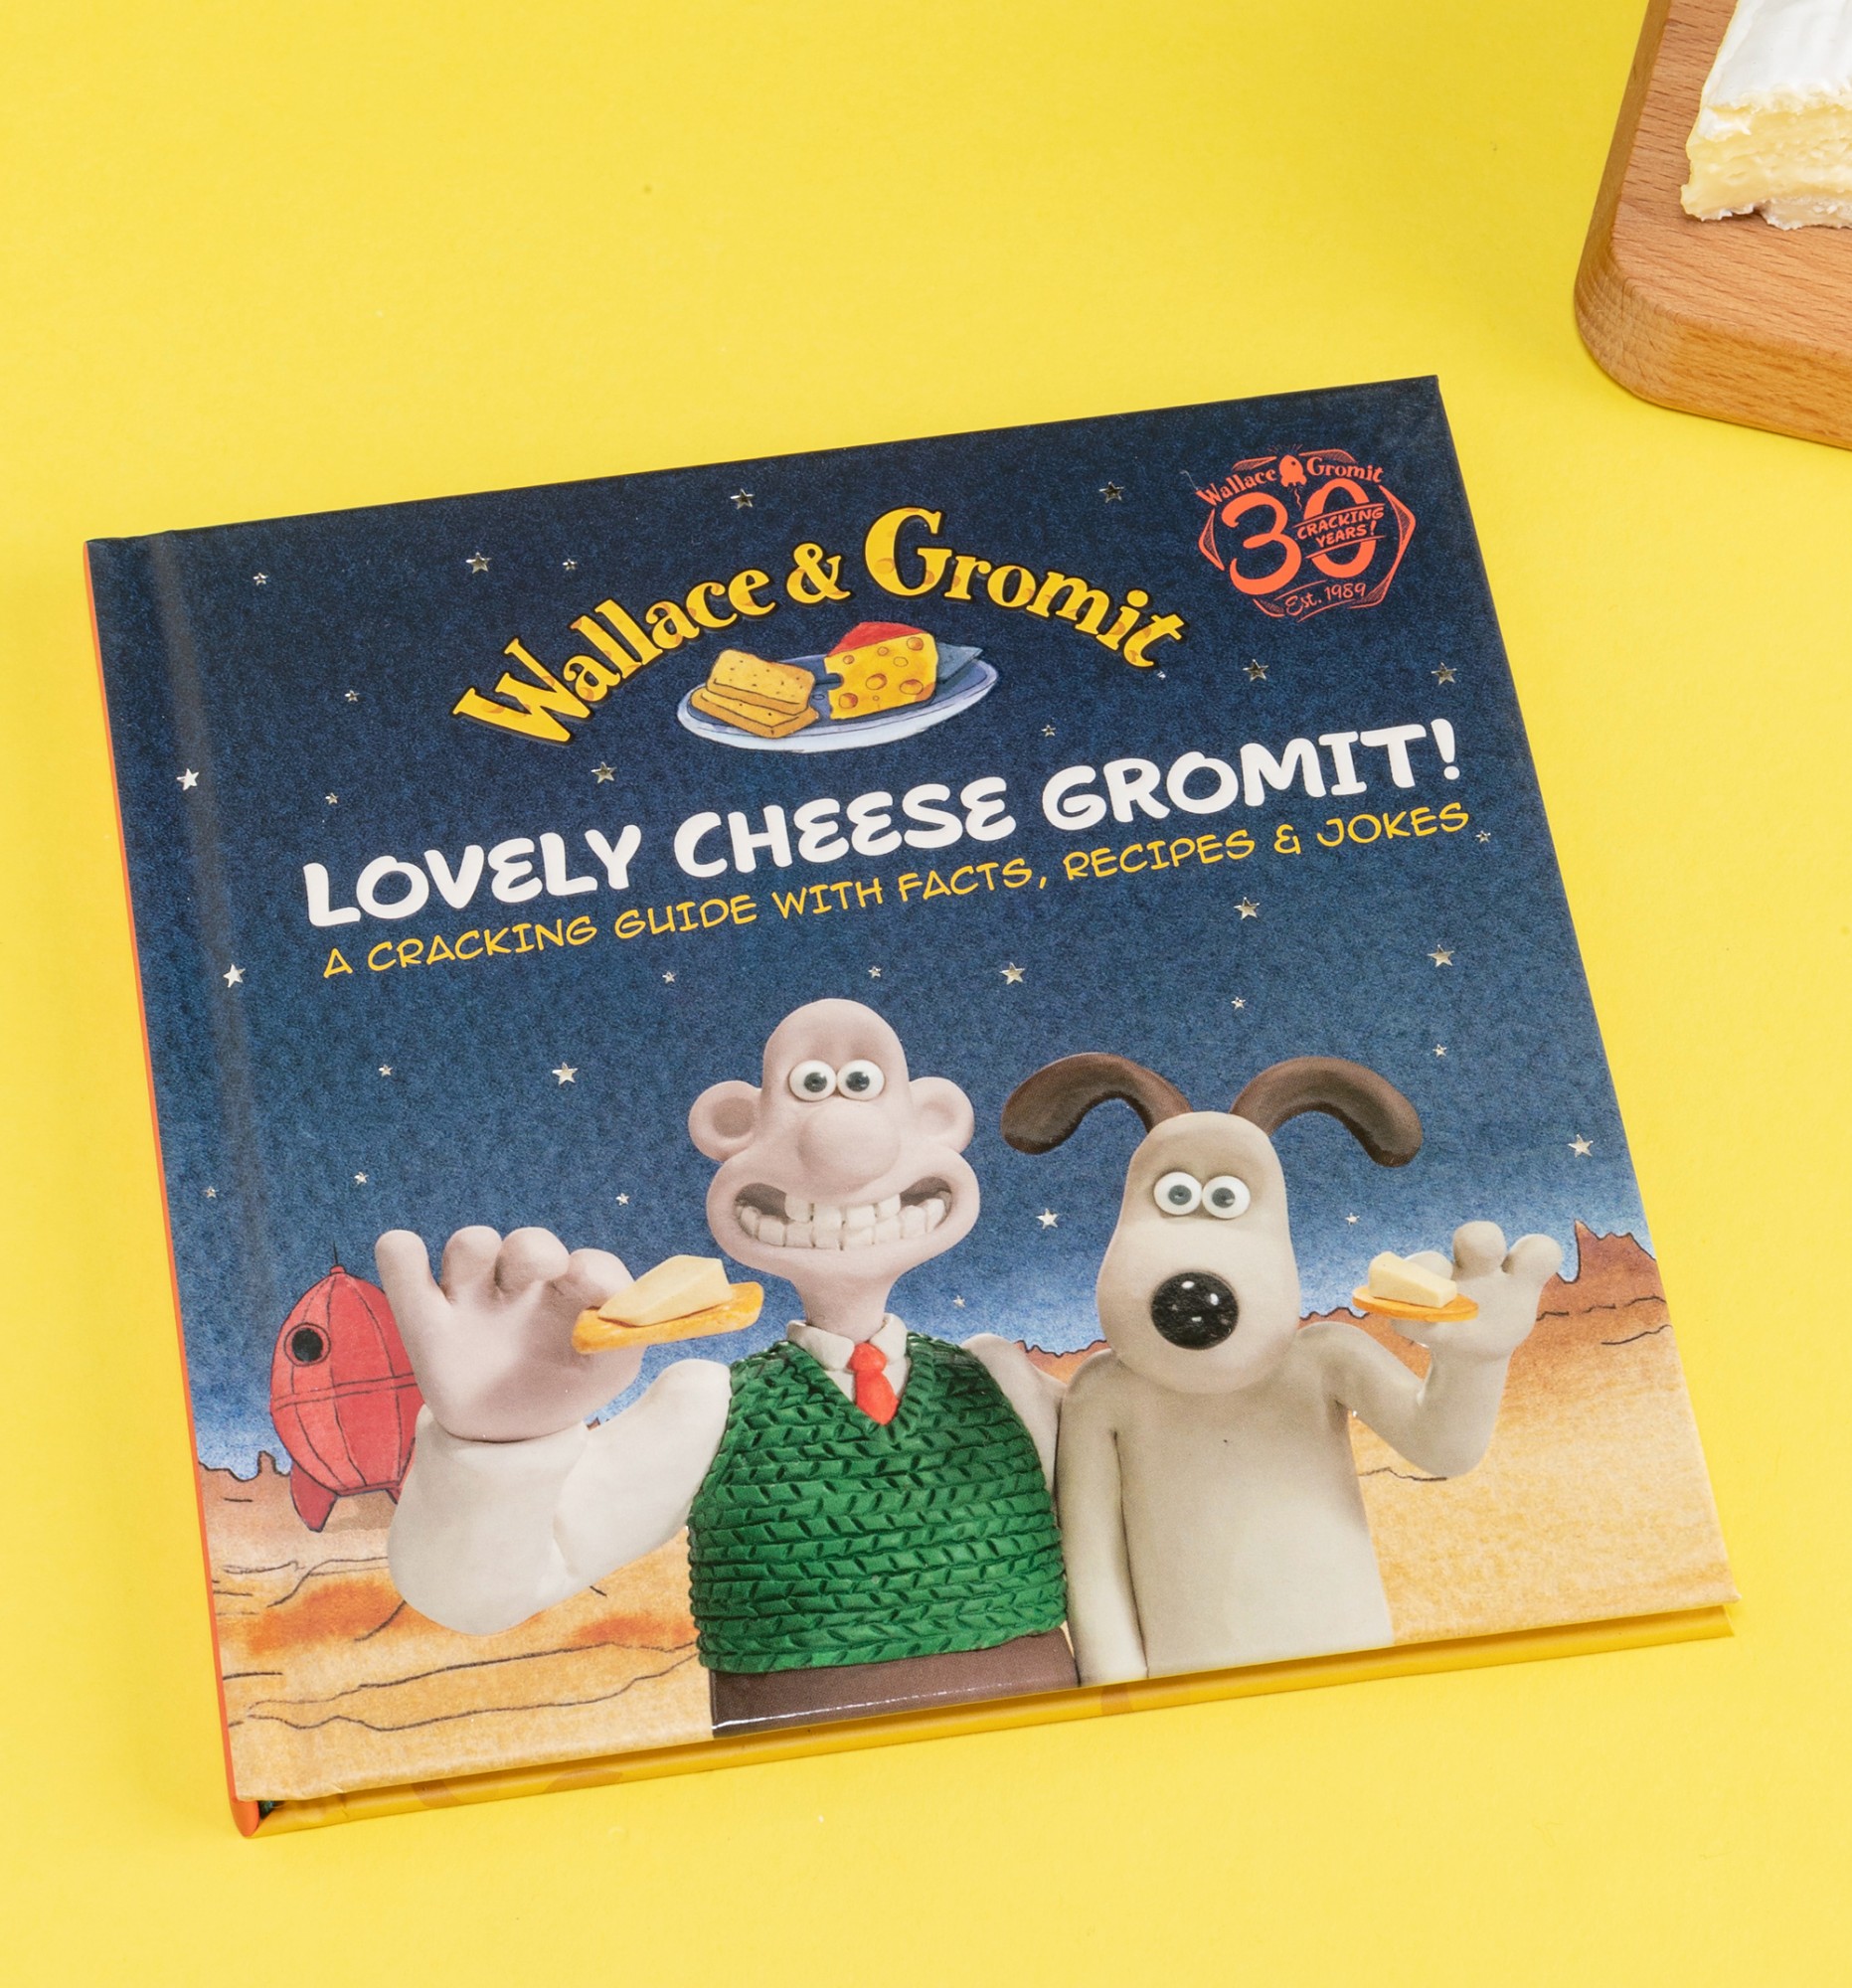 Cheese gromit gif